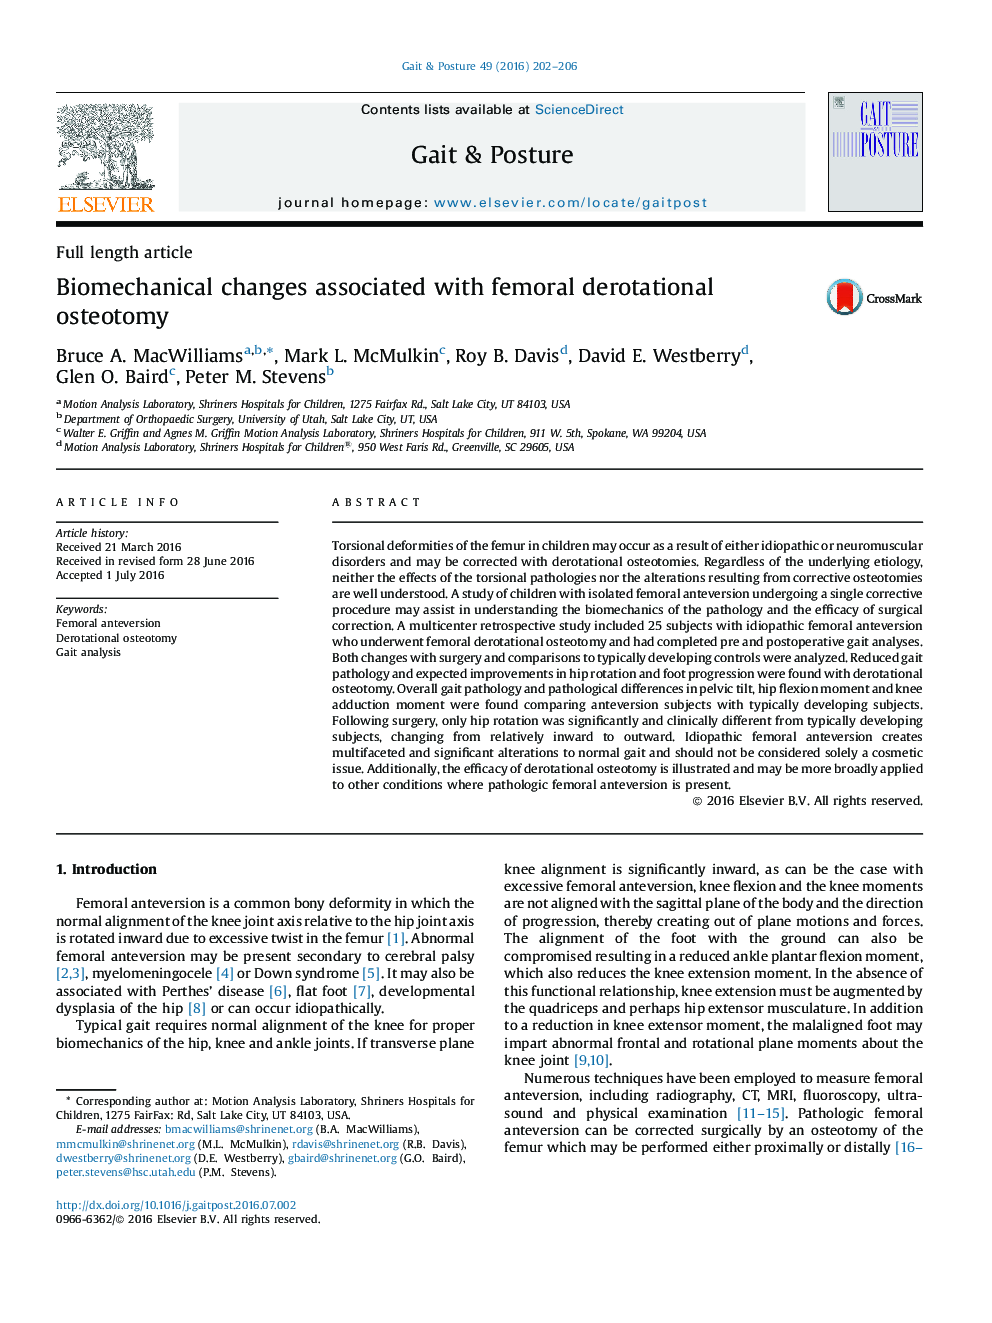 Biomechanical changes associated with femoral derotational osteotomy